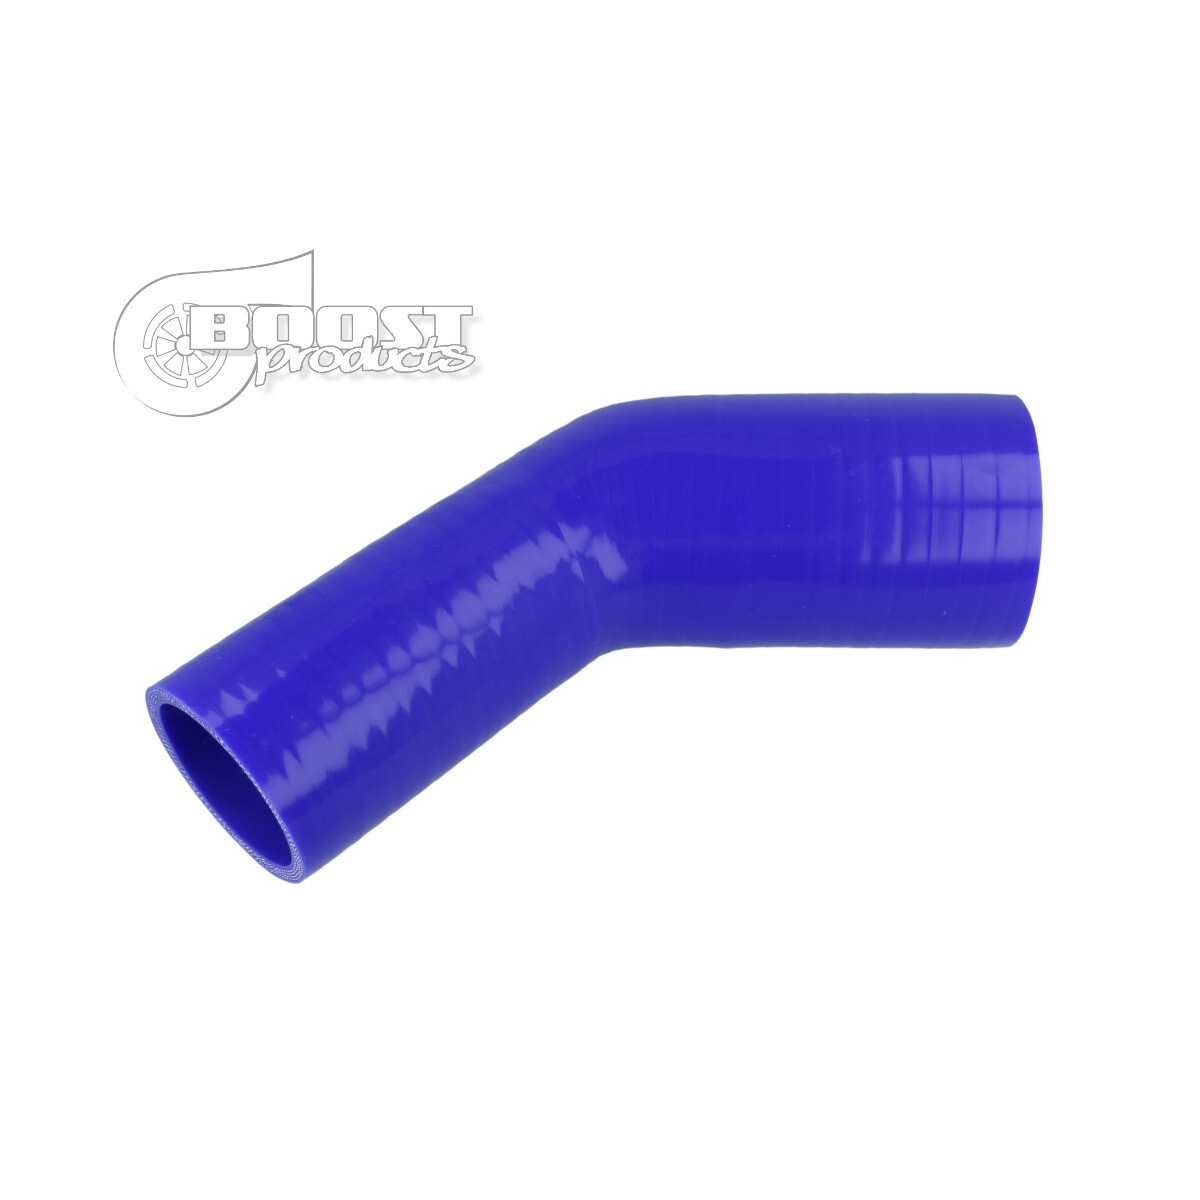 BOOST products Silicone Transition elbow 45°, 19 - 16mm, blue